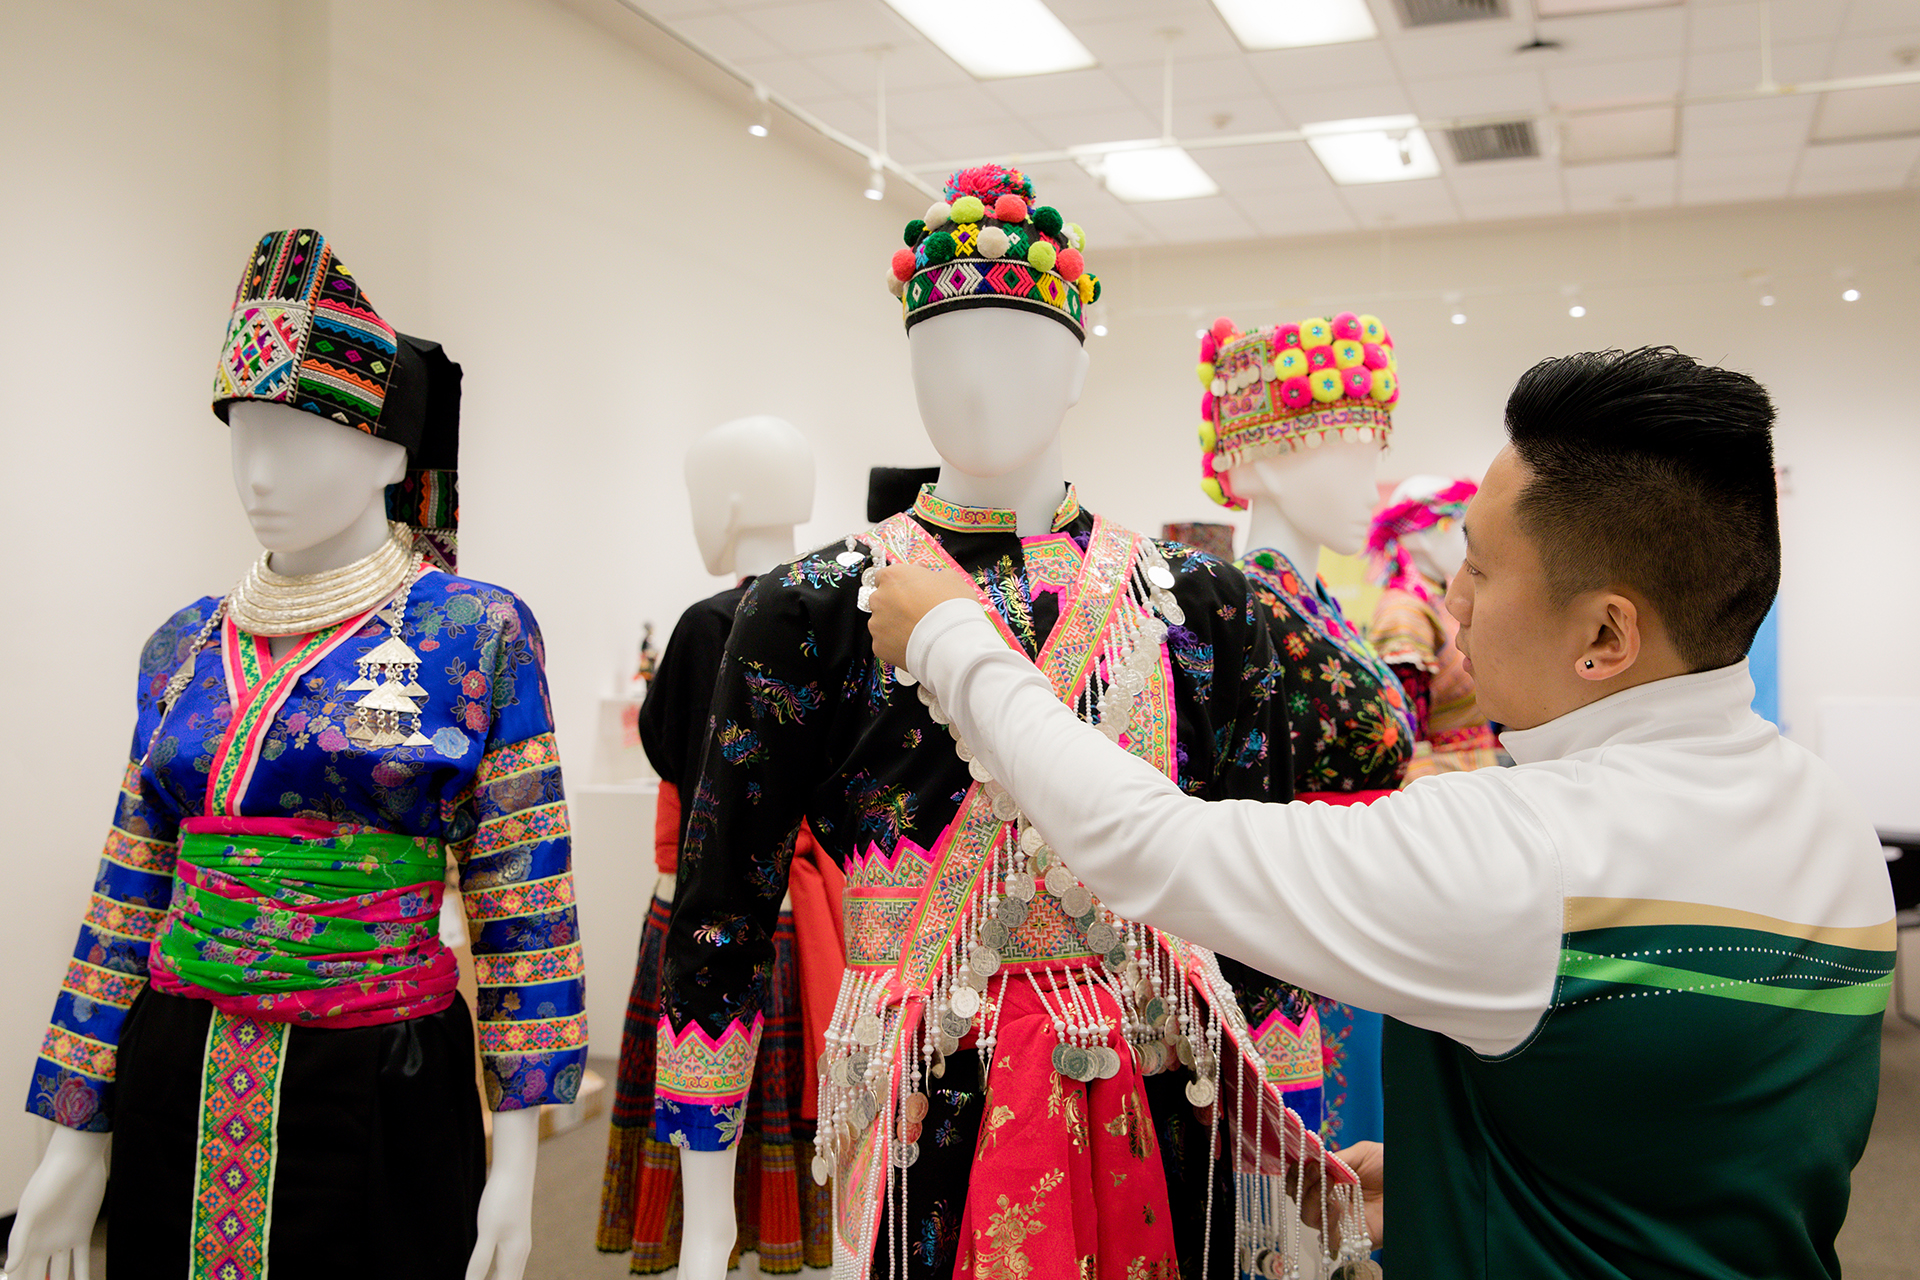 A member of the group who put together a Hmong cloth exhibit at Sacramento State adjusts one of the clothing items.